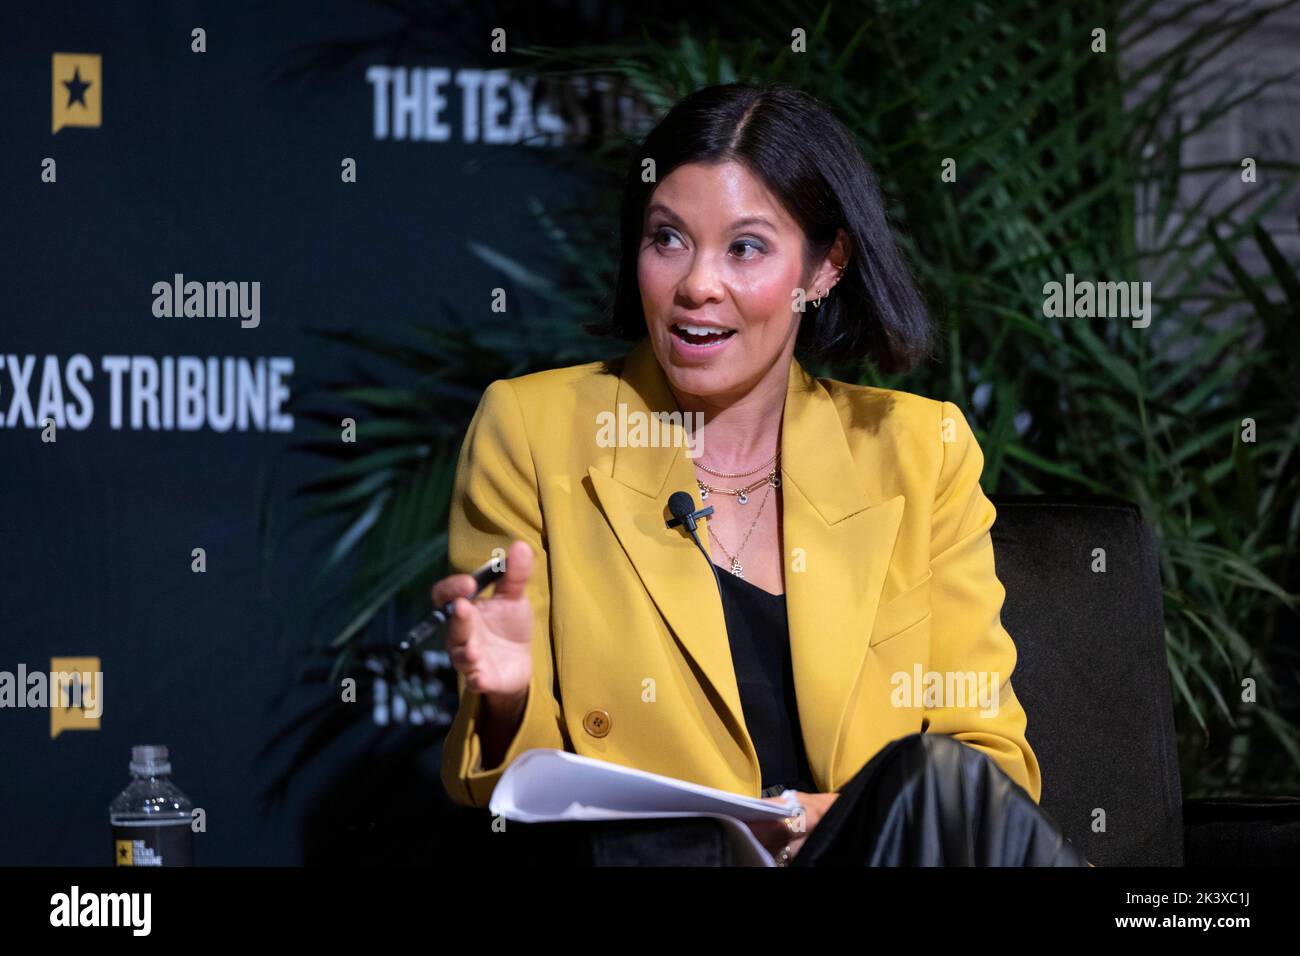 Host of 'Alex Wagner Tonight' on MSNBC, ALEX WAGNER interviews Gavin Newsom during an interview session at the annual Texas Tribune Festival in downtown Austin on September 24, 2022. Stock Photo